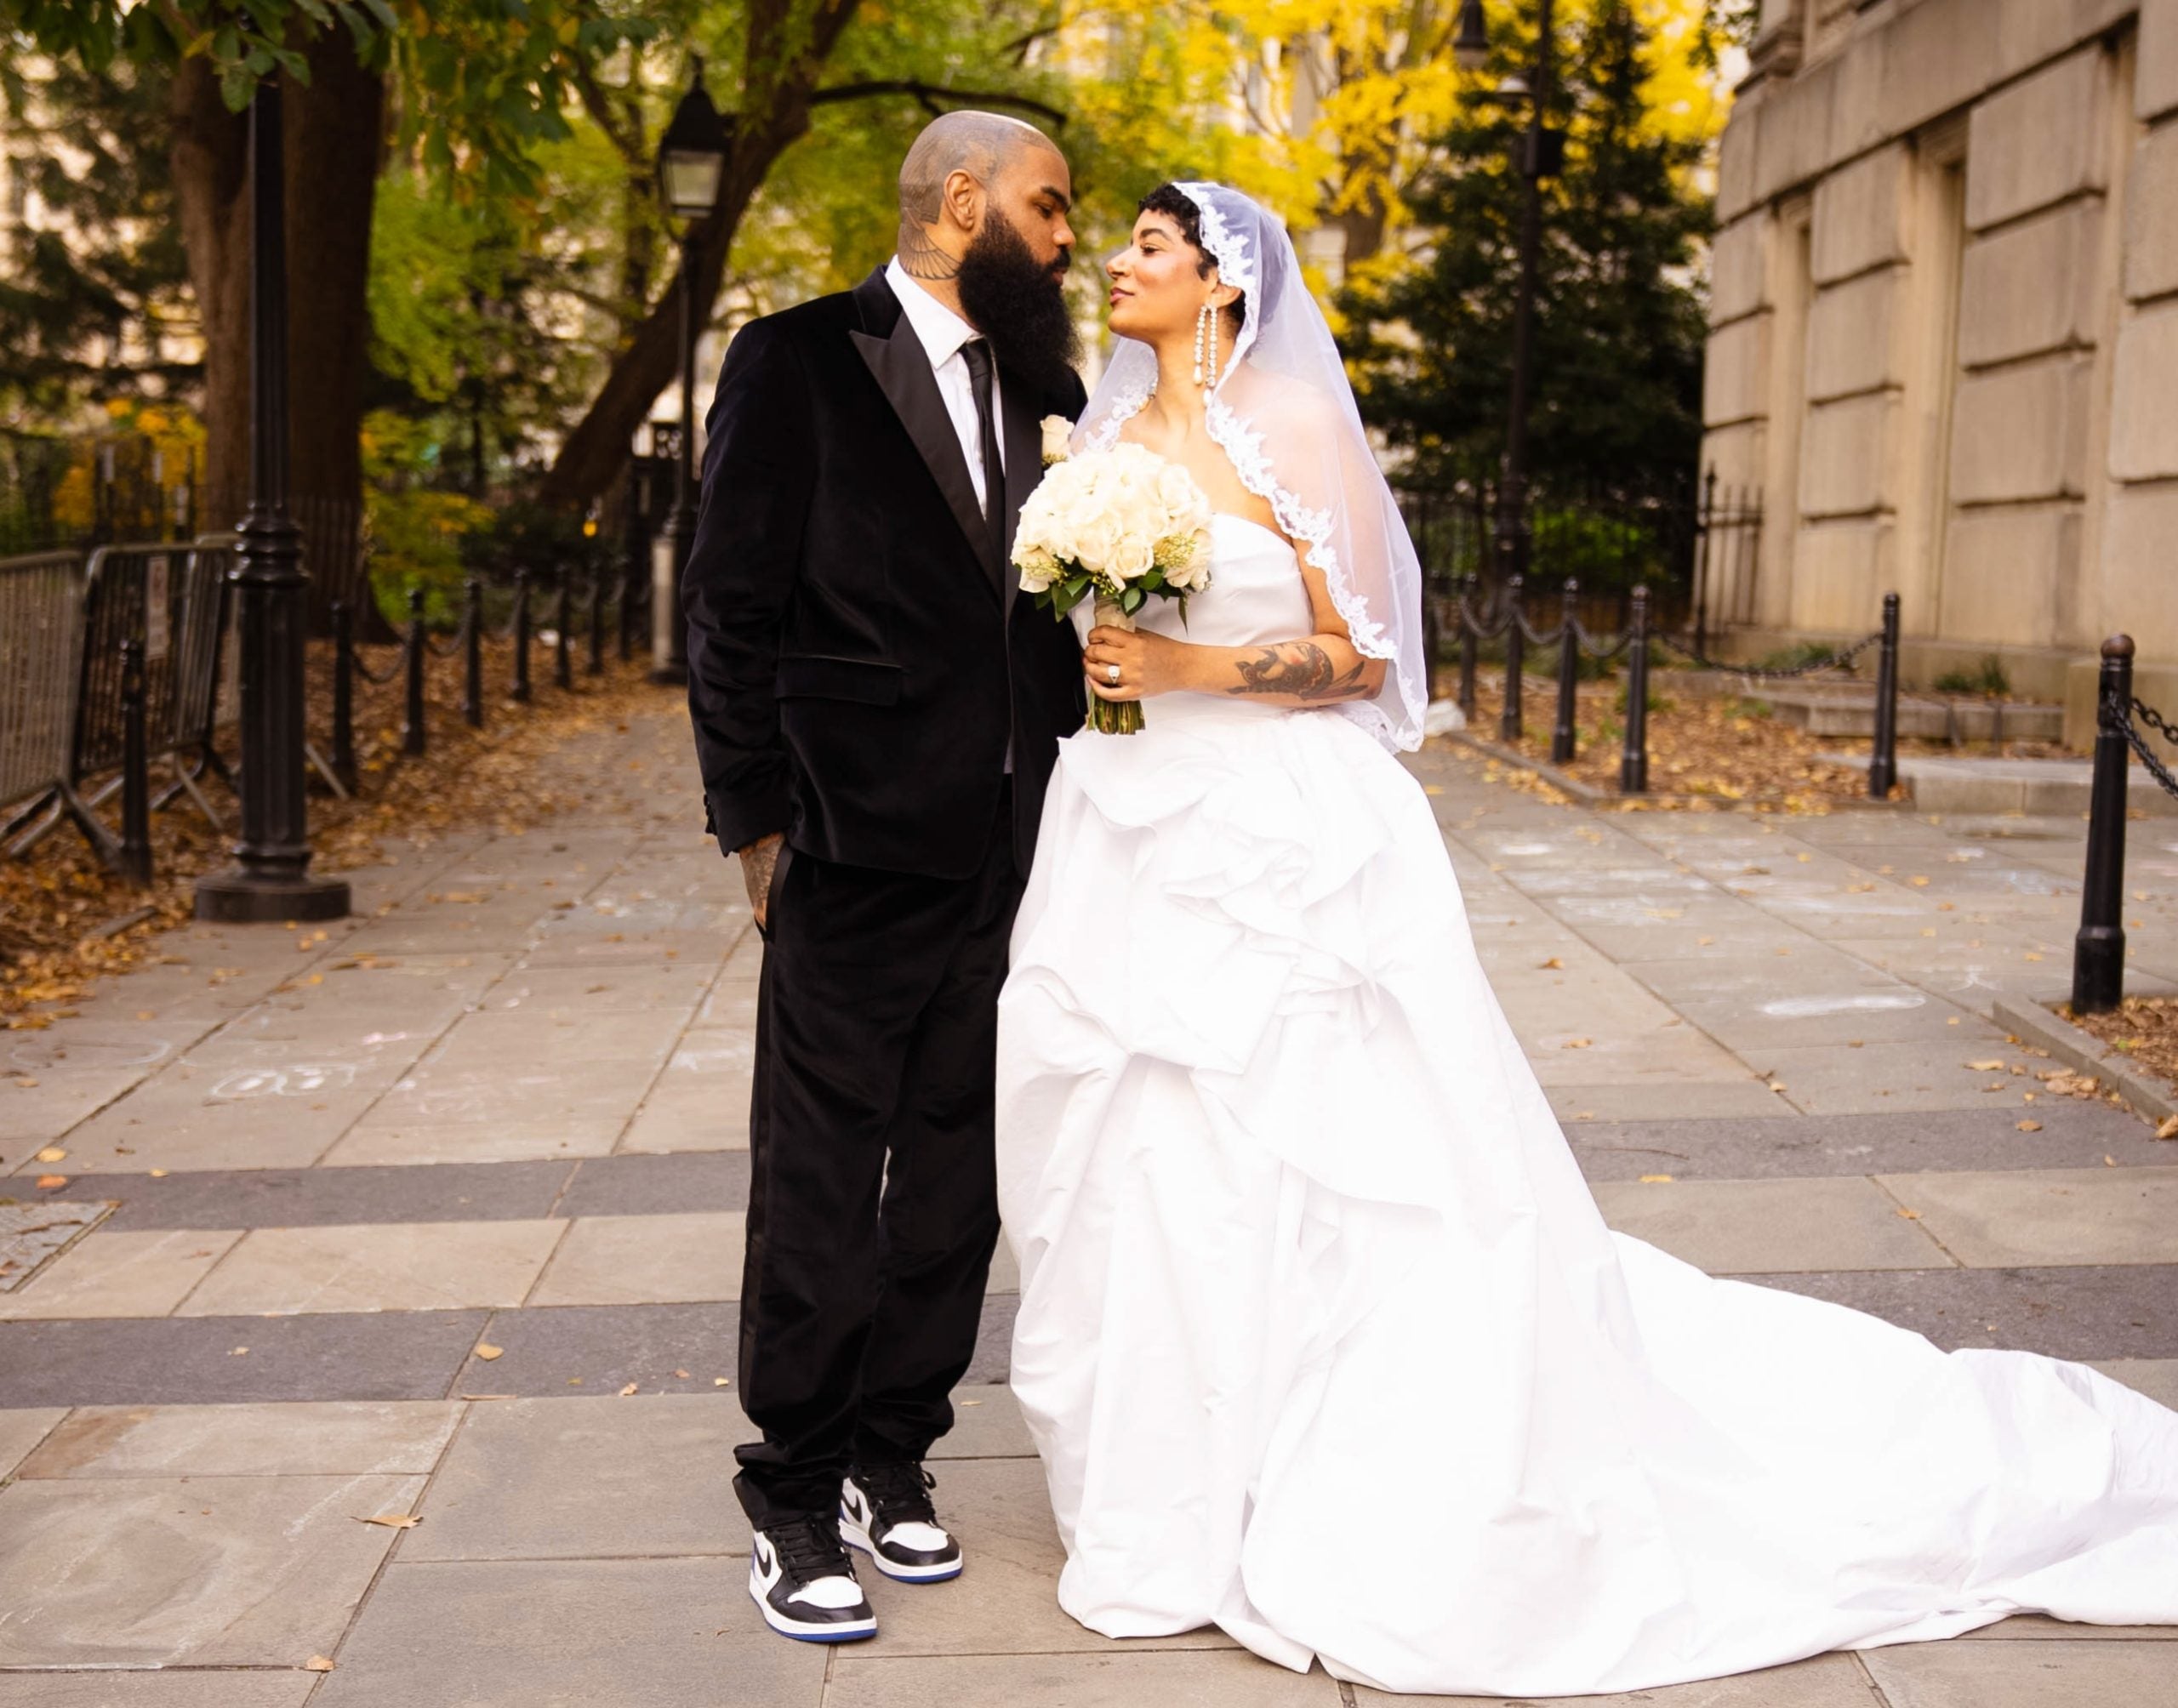 Bridal Bliss: With Ceremonies At City Hall And A Mosque, Aiesha And Rapper Stalley’s Wedding Was An ‘All-Day Celebration’